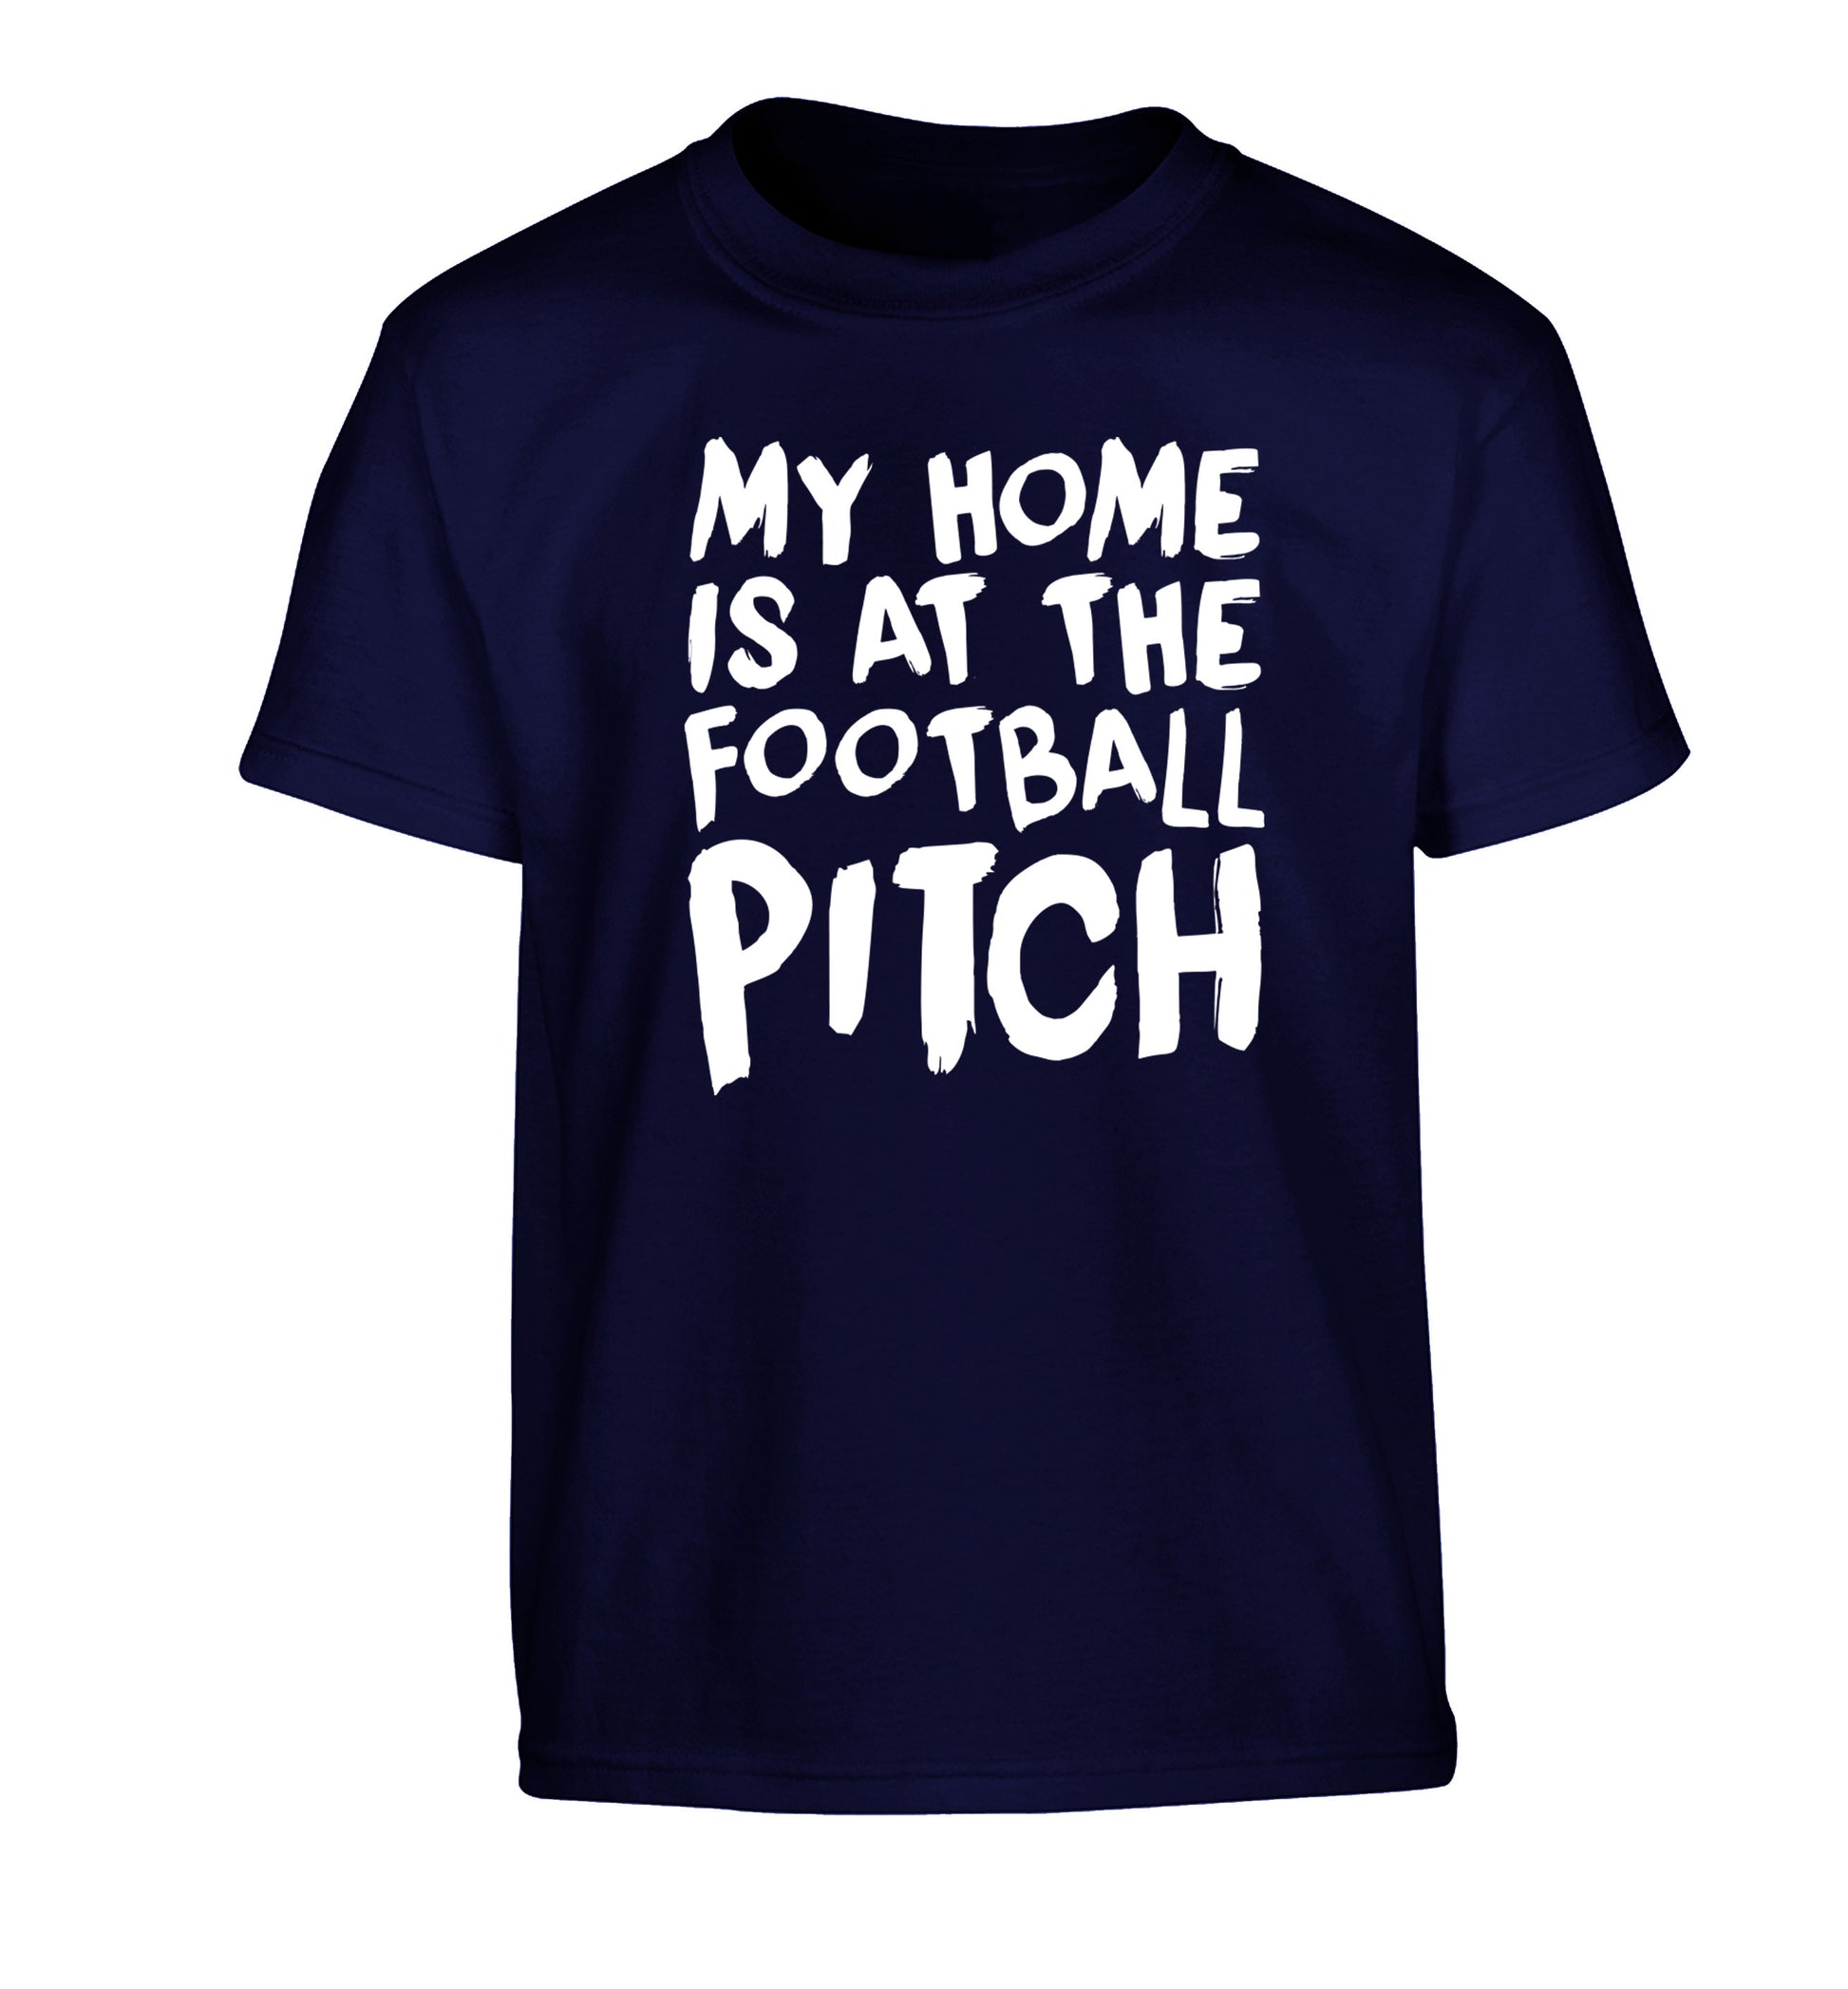 My home is at the football pitch Children's navy Tshirt 12-14 Years